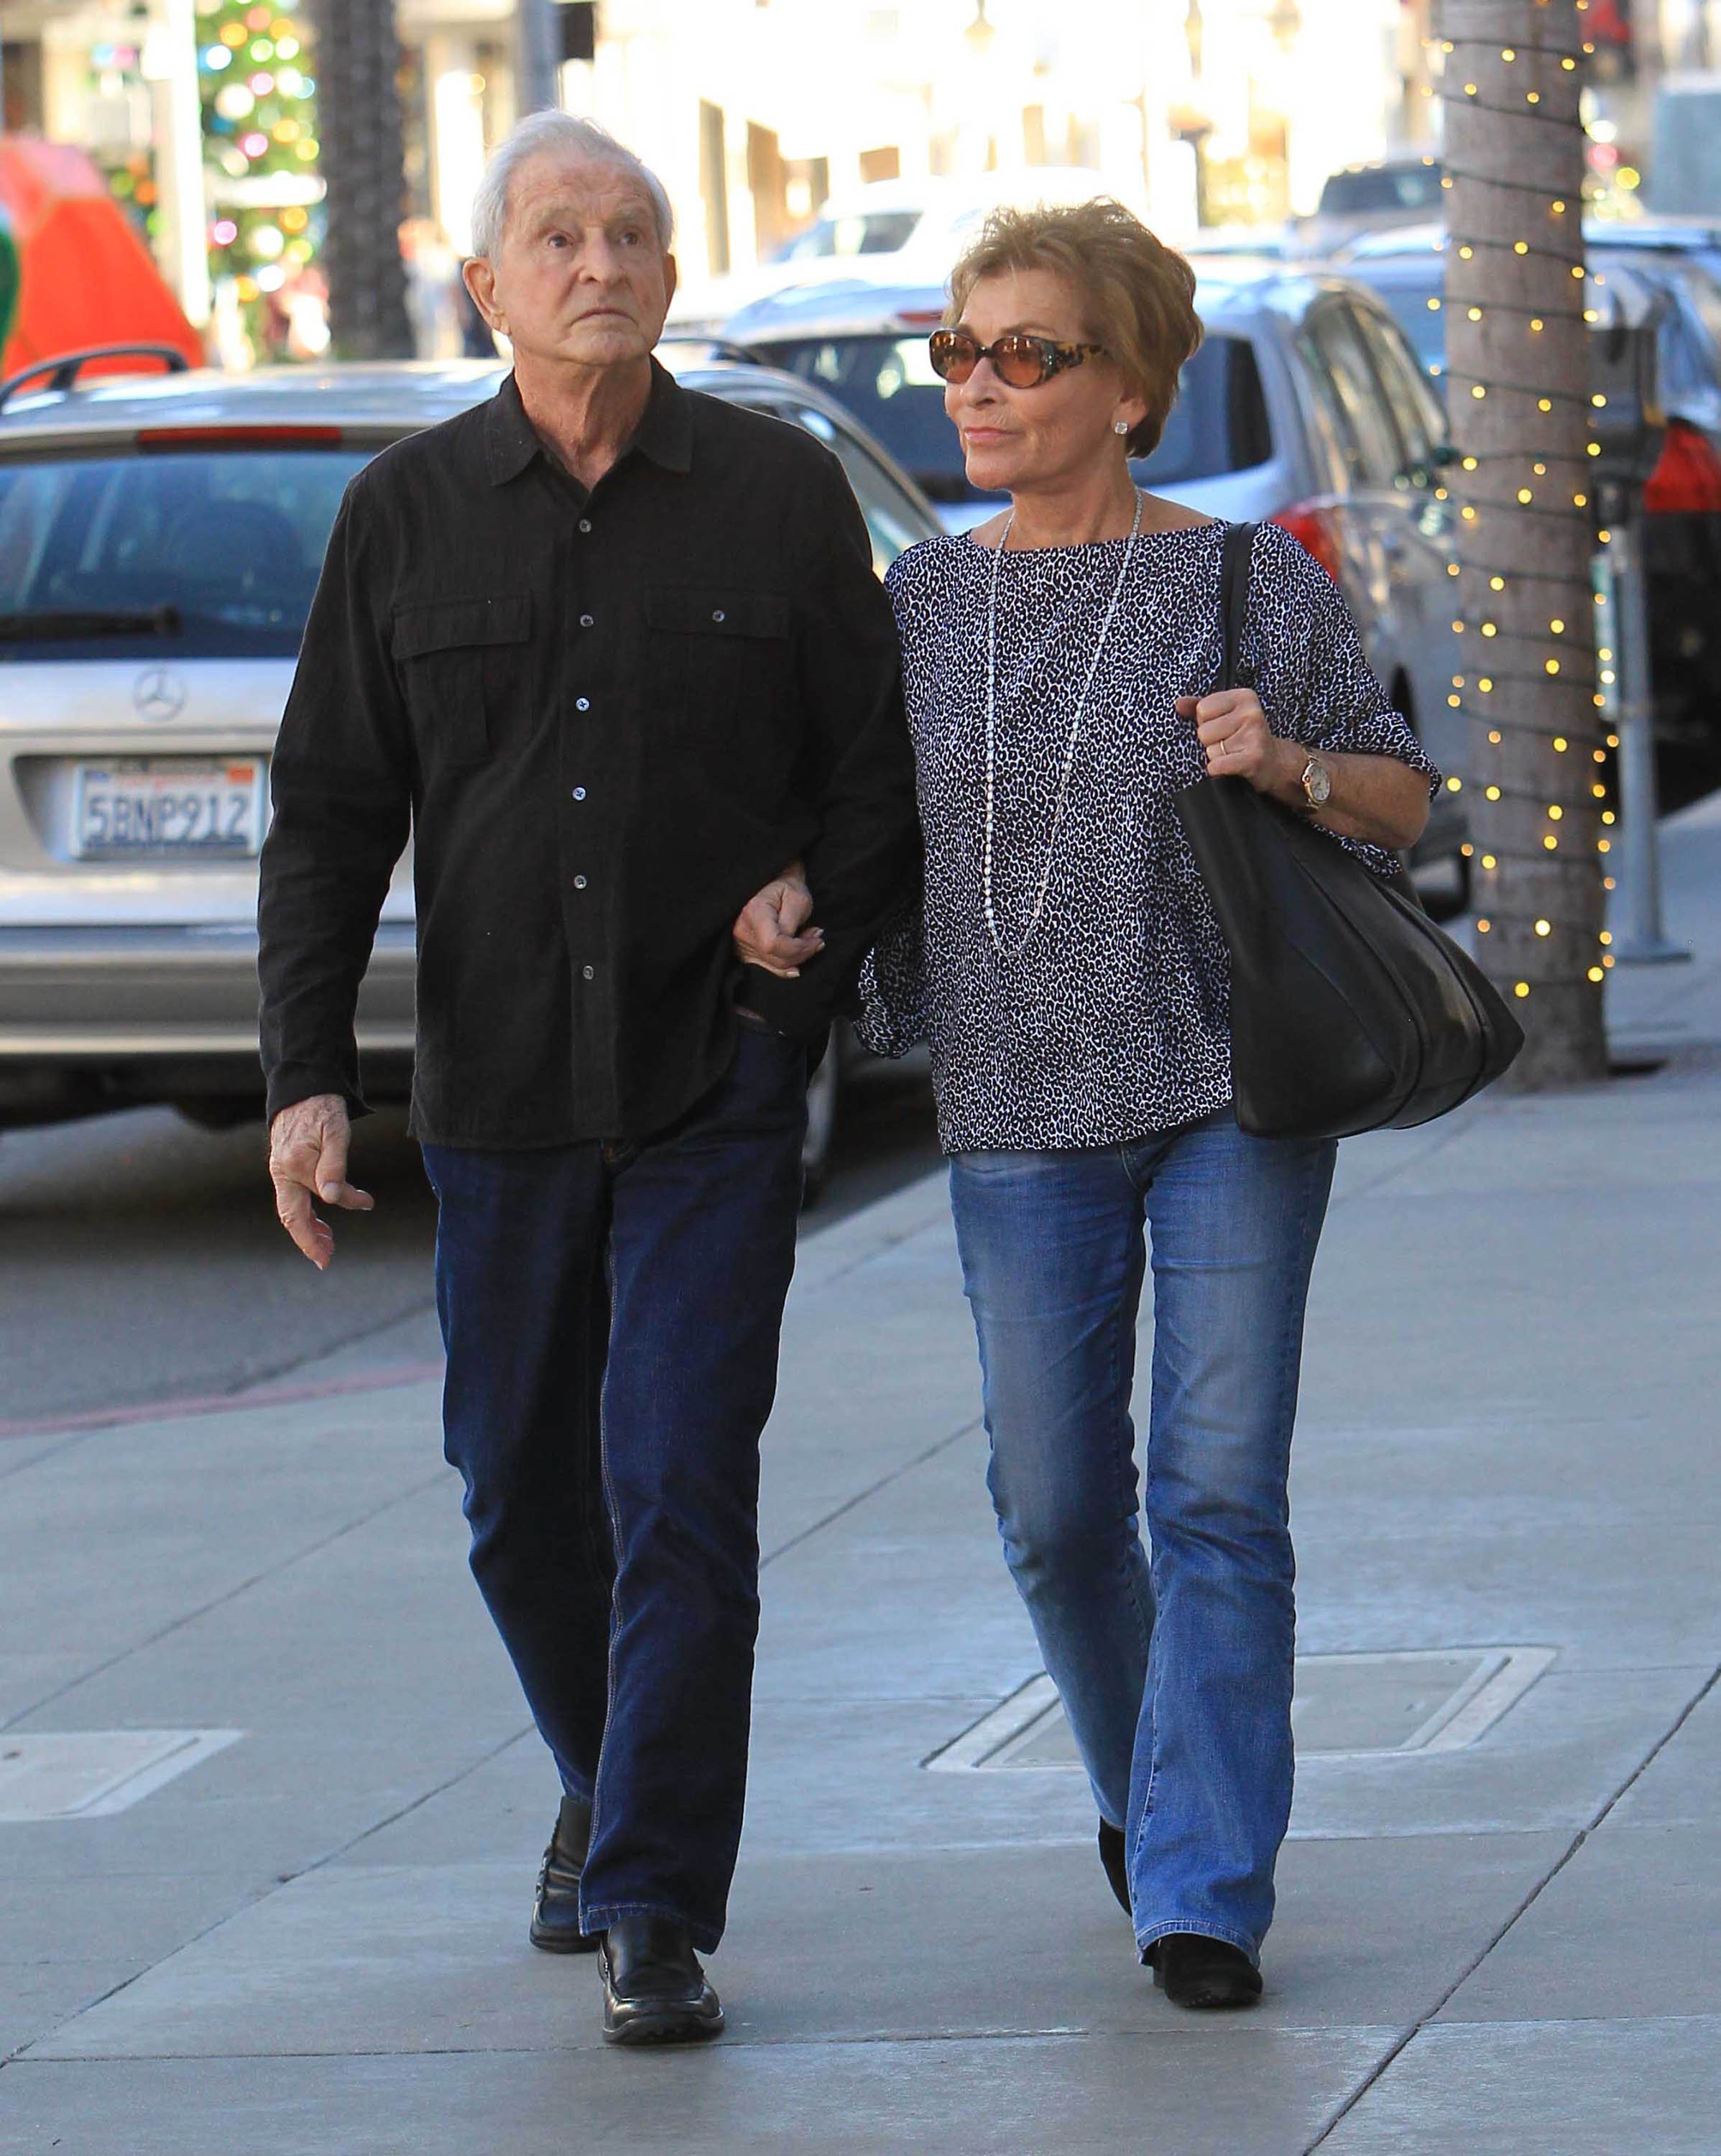 Judge Judy Sheindlin and her husband Jerry Sheindlin are seen on December 15, 2017 in Los Angeles, California | Source: Getty Images